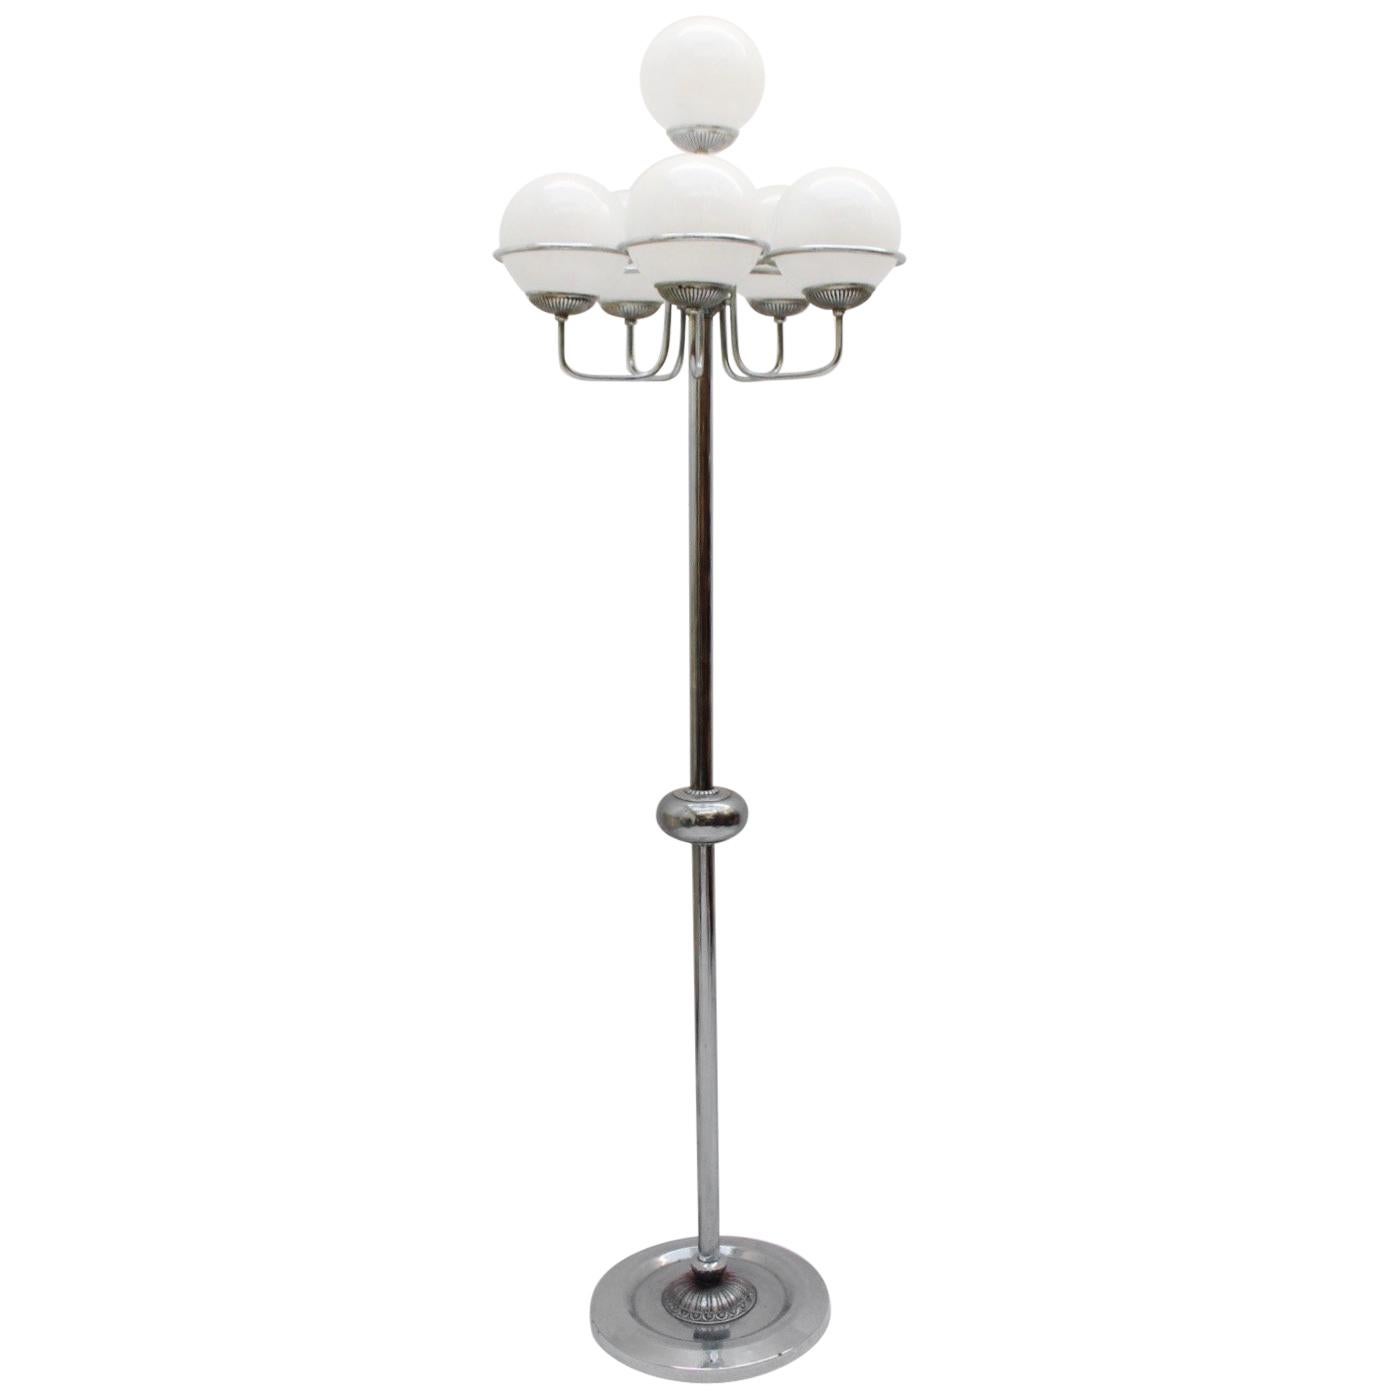 Midcentury Space Age Chrome 6-Lights Floor Lamp, 1960s For Sale